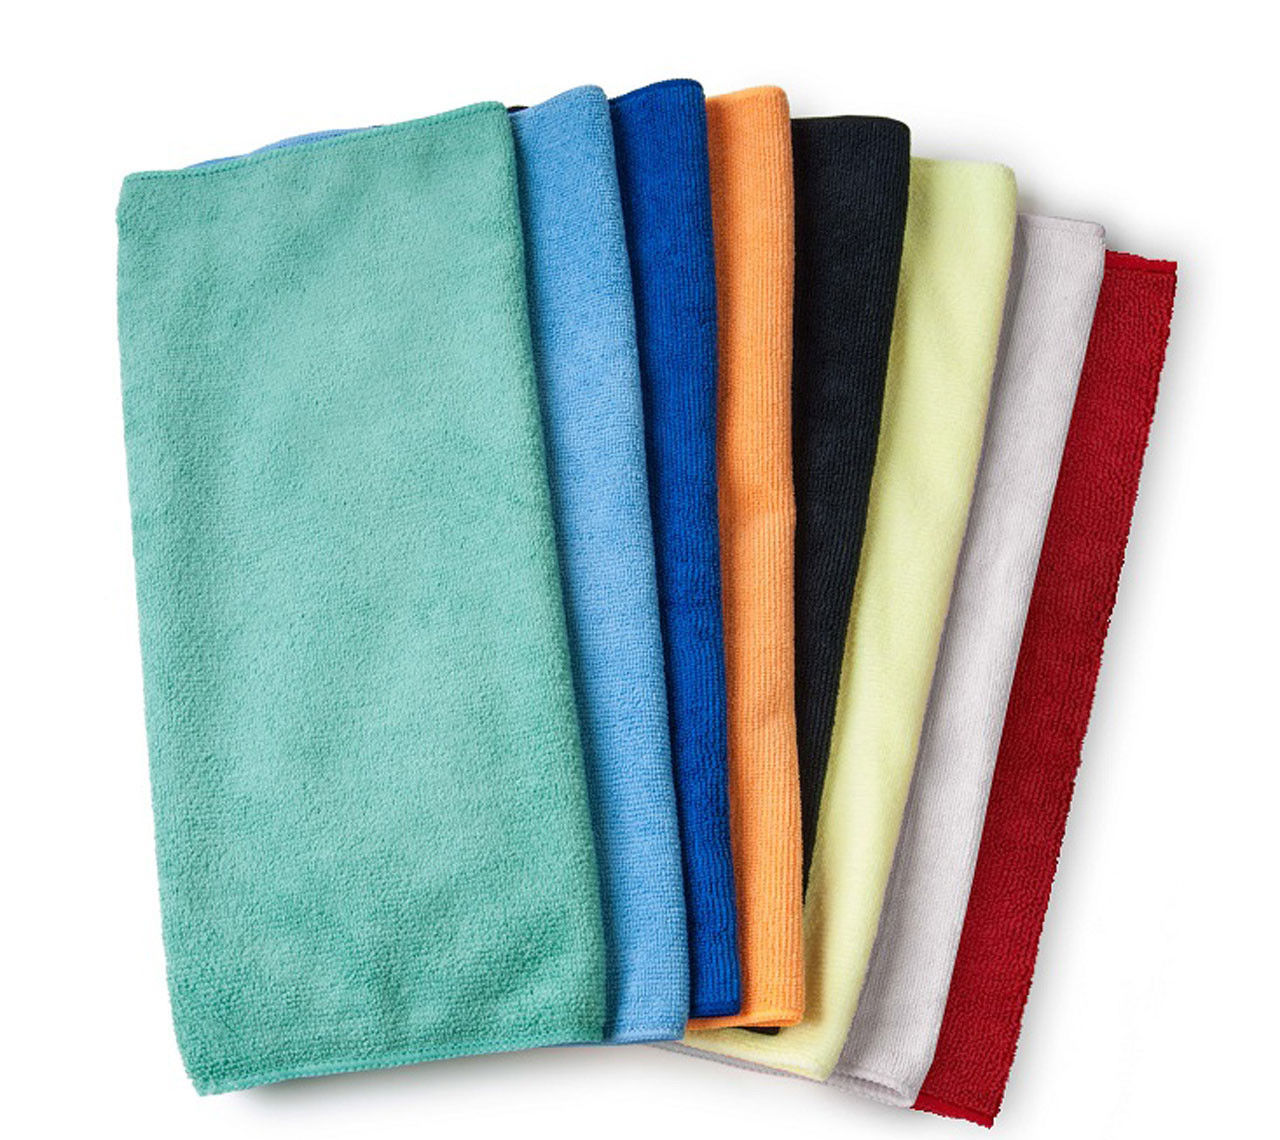 What exactly is a 'Microfiber Golf Towel, in Bulk - 300 gsm,16 x 16' in golf towels bulk?